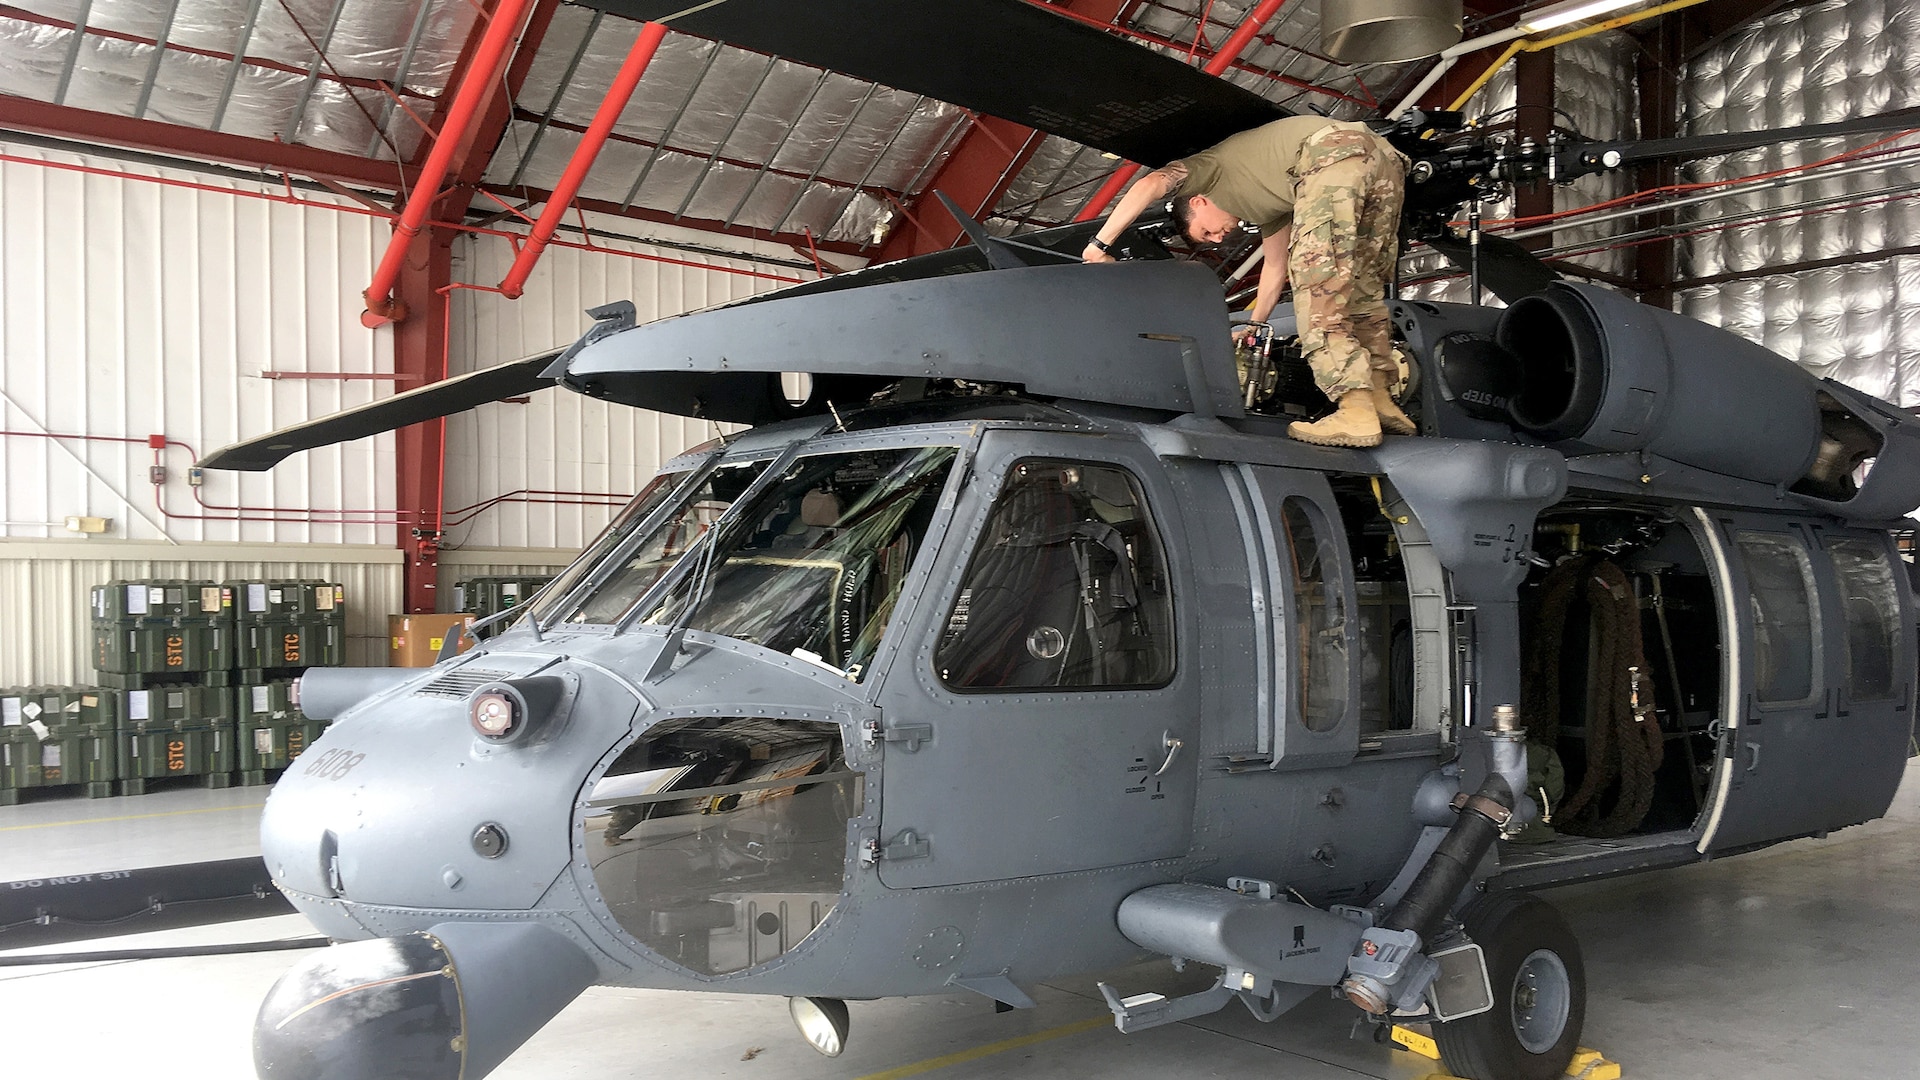 Maintainers check over an HH-60 Pave Hawk helicopter as members of the New York Air National Guard’s 106th Rescue Wing prepare to deploy in support of rescue efforts following Hurricane Michael in October.